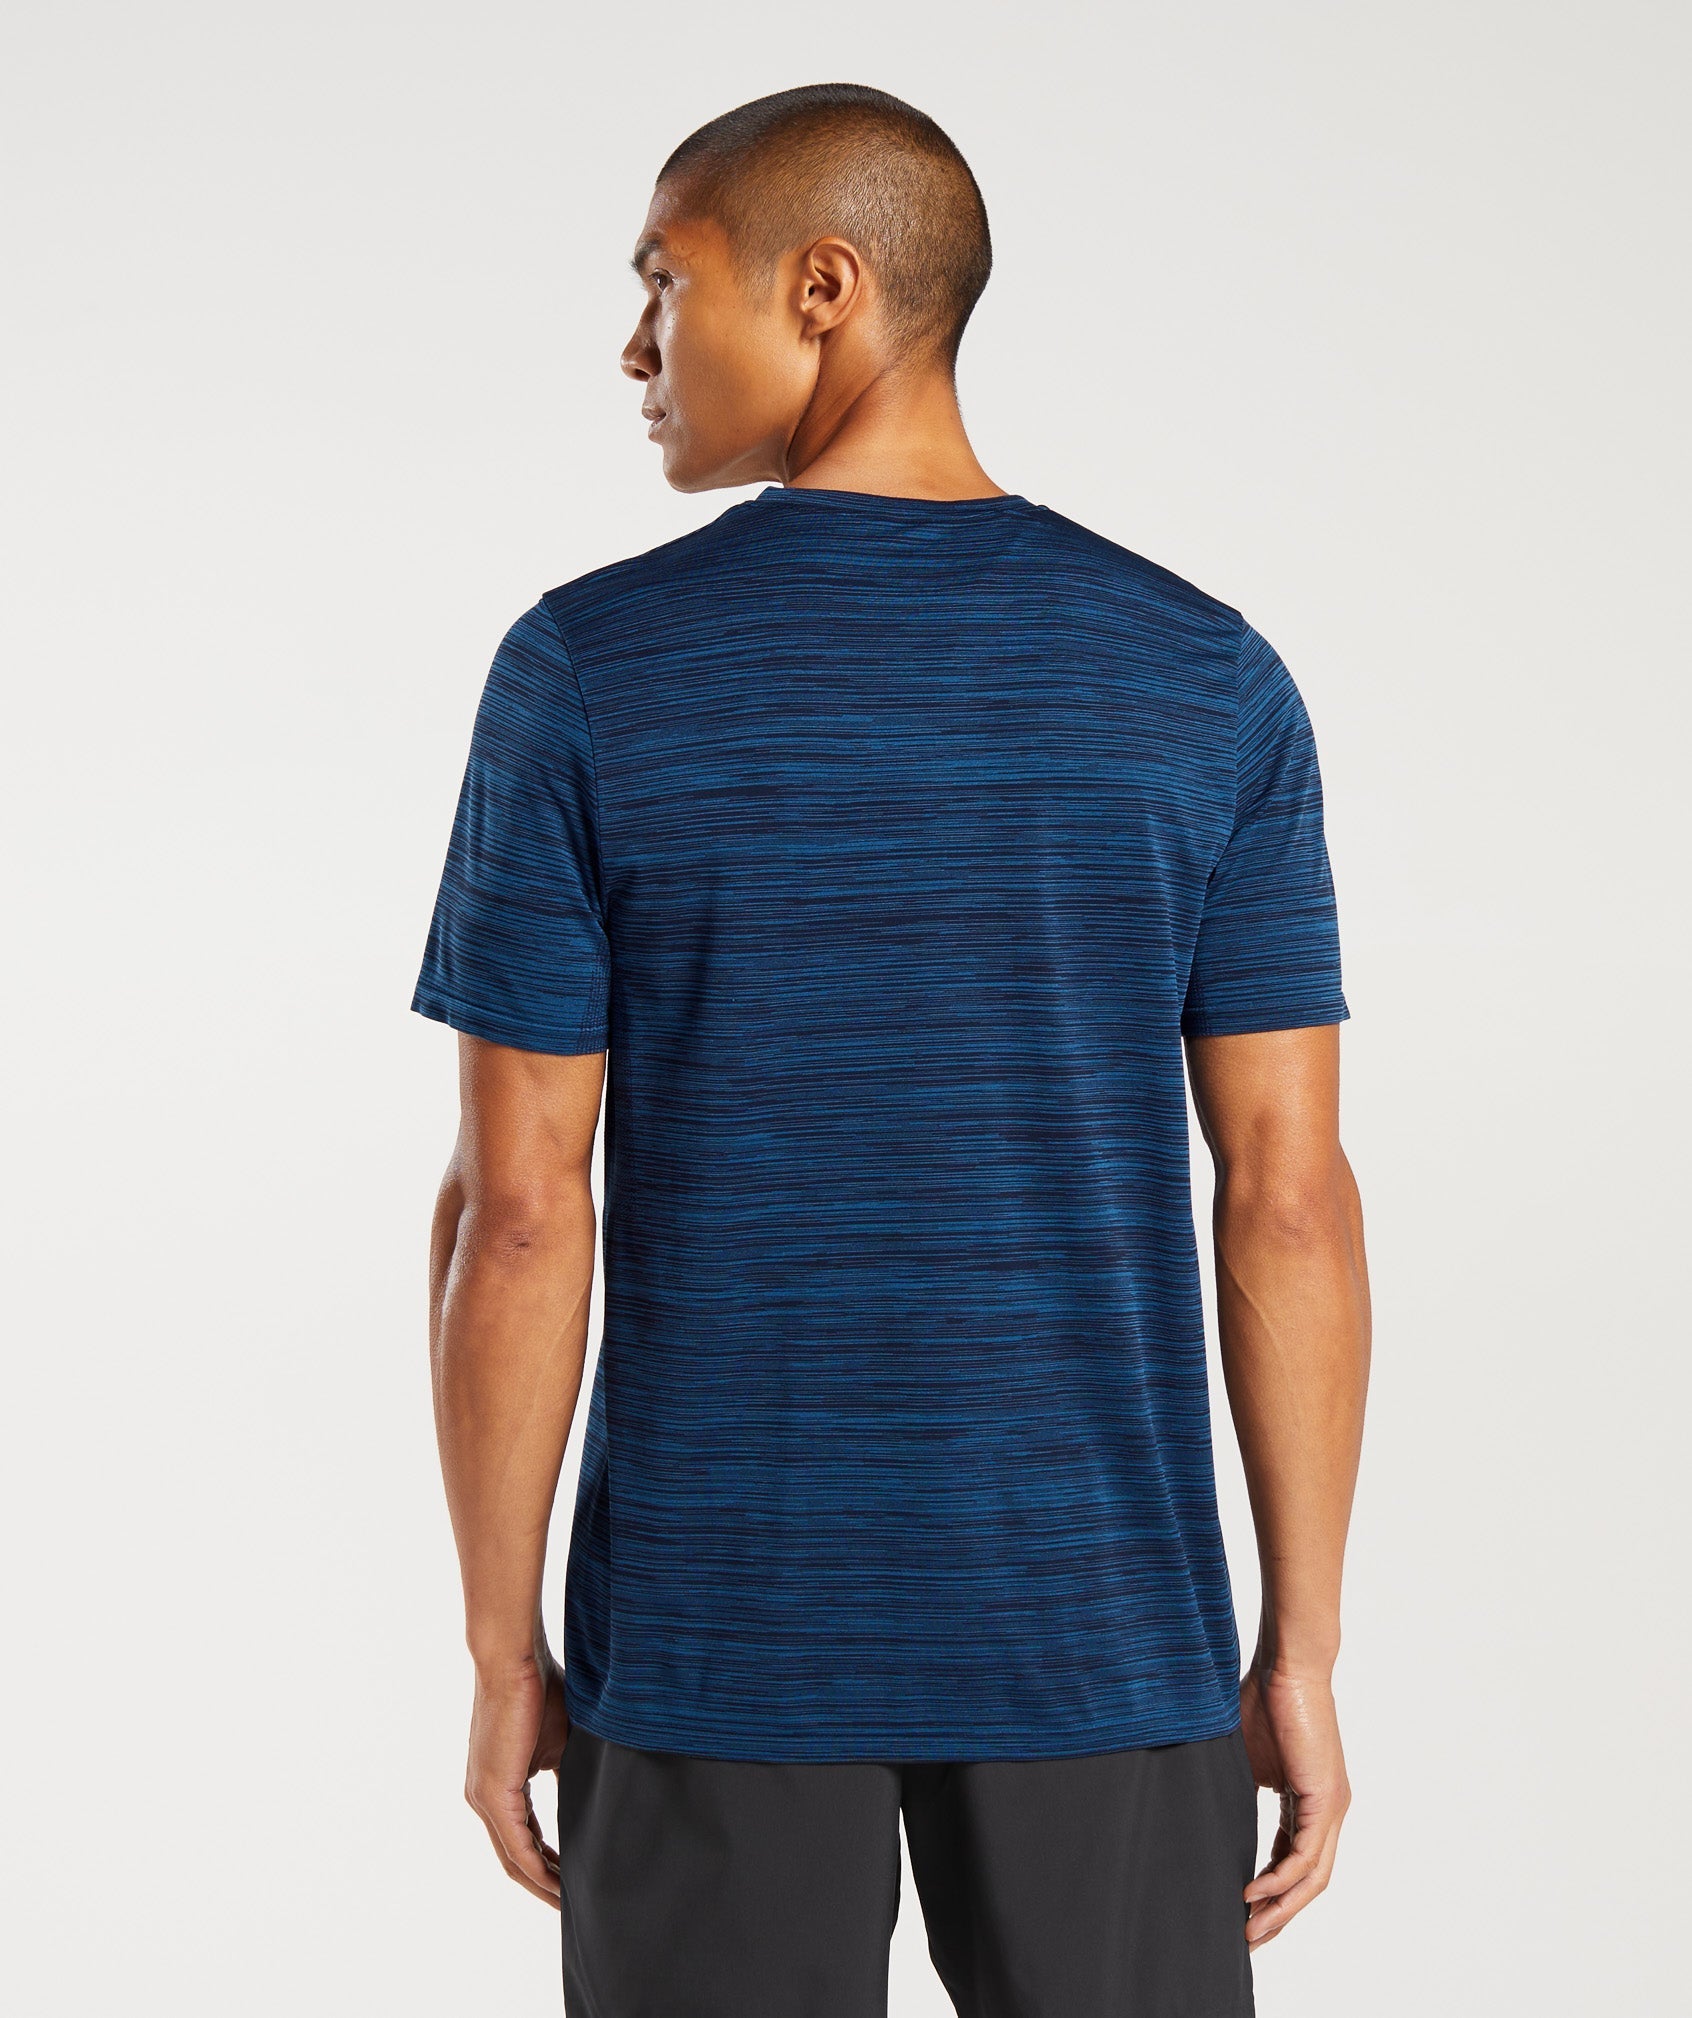 Heather Seamless T-Shirt in Navy/Core Blue Marl - view 2